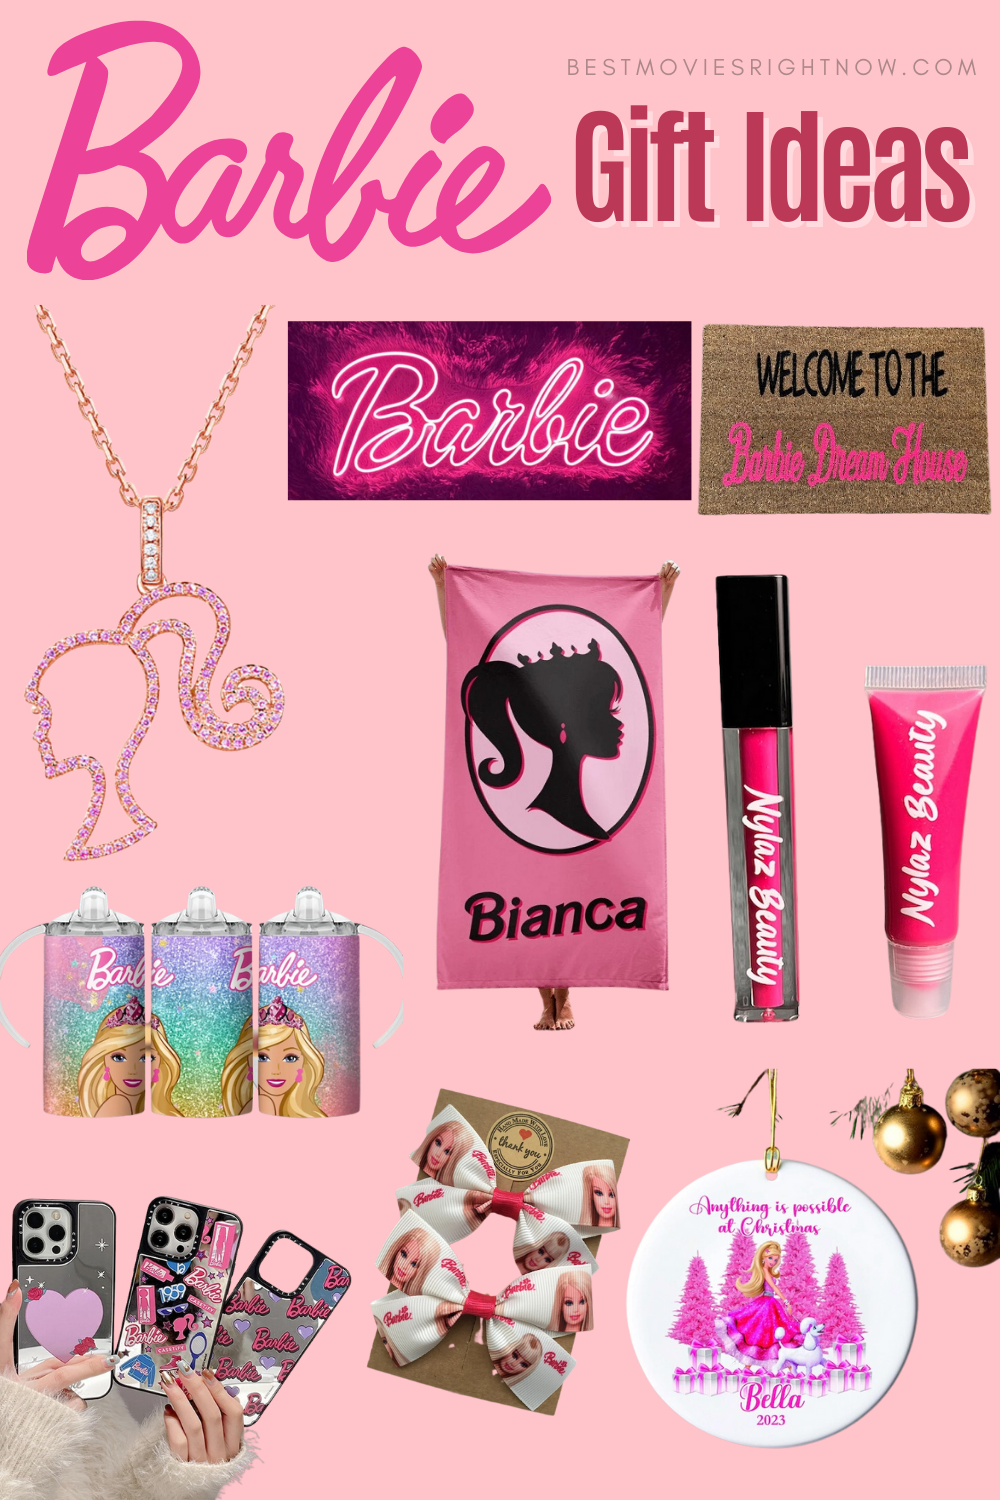 image of barbie gift ideas with text